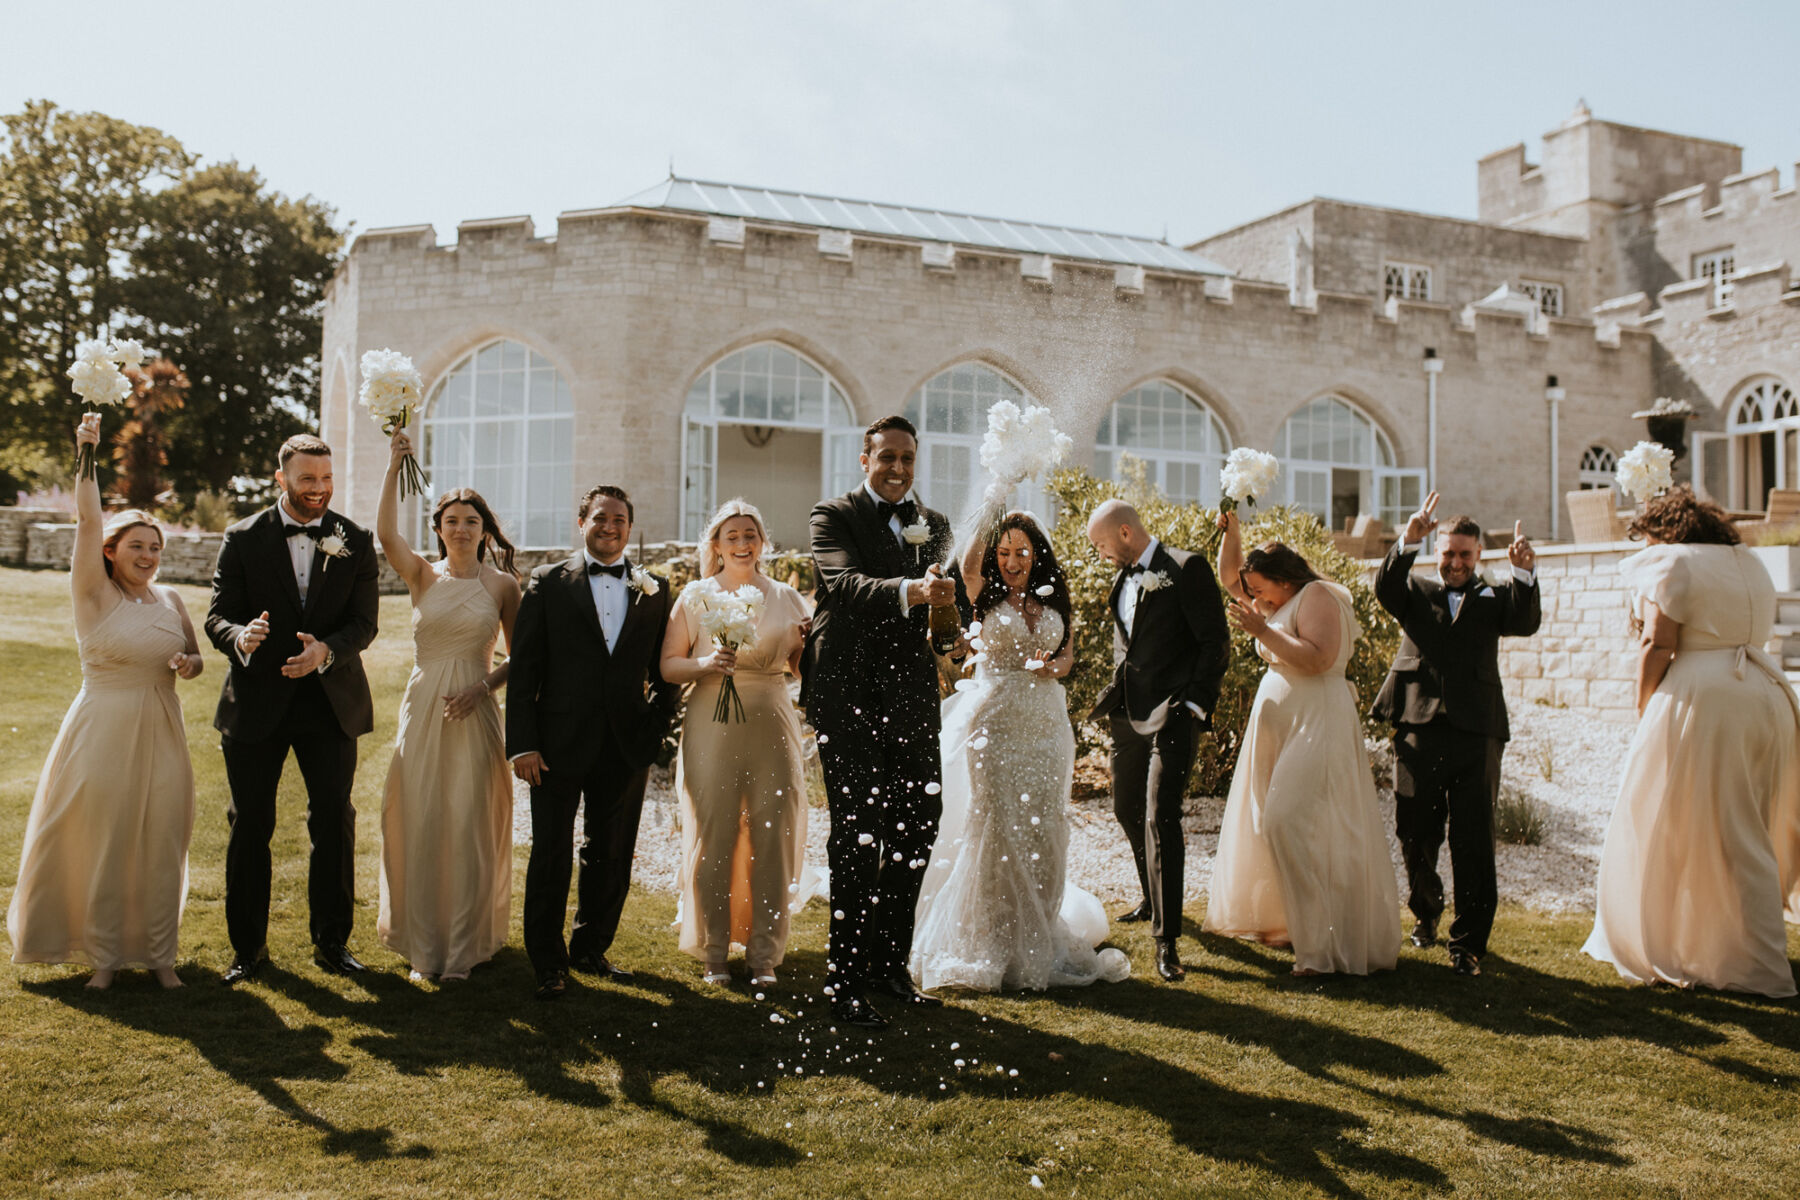 Bride and groom popping a bottle of champagne - surrounded by their bridal party in black tie and pale champagne coloured bridesmaids dresses.